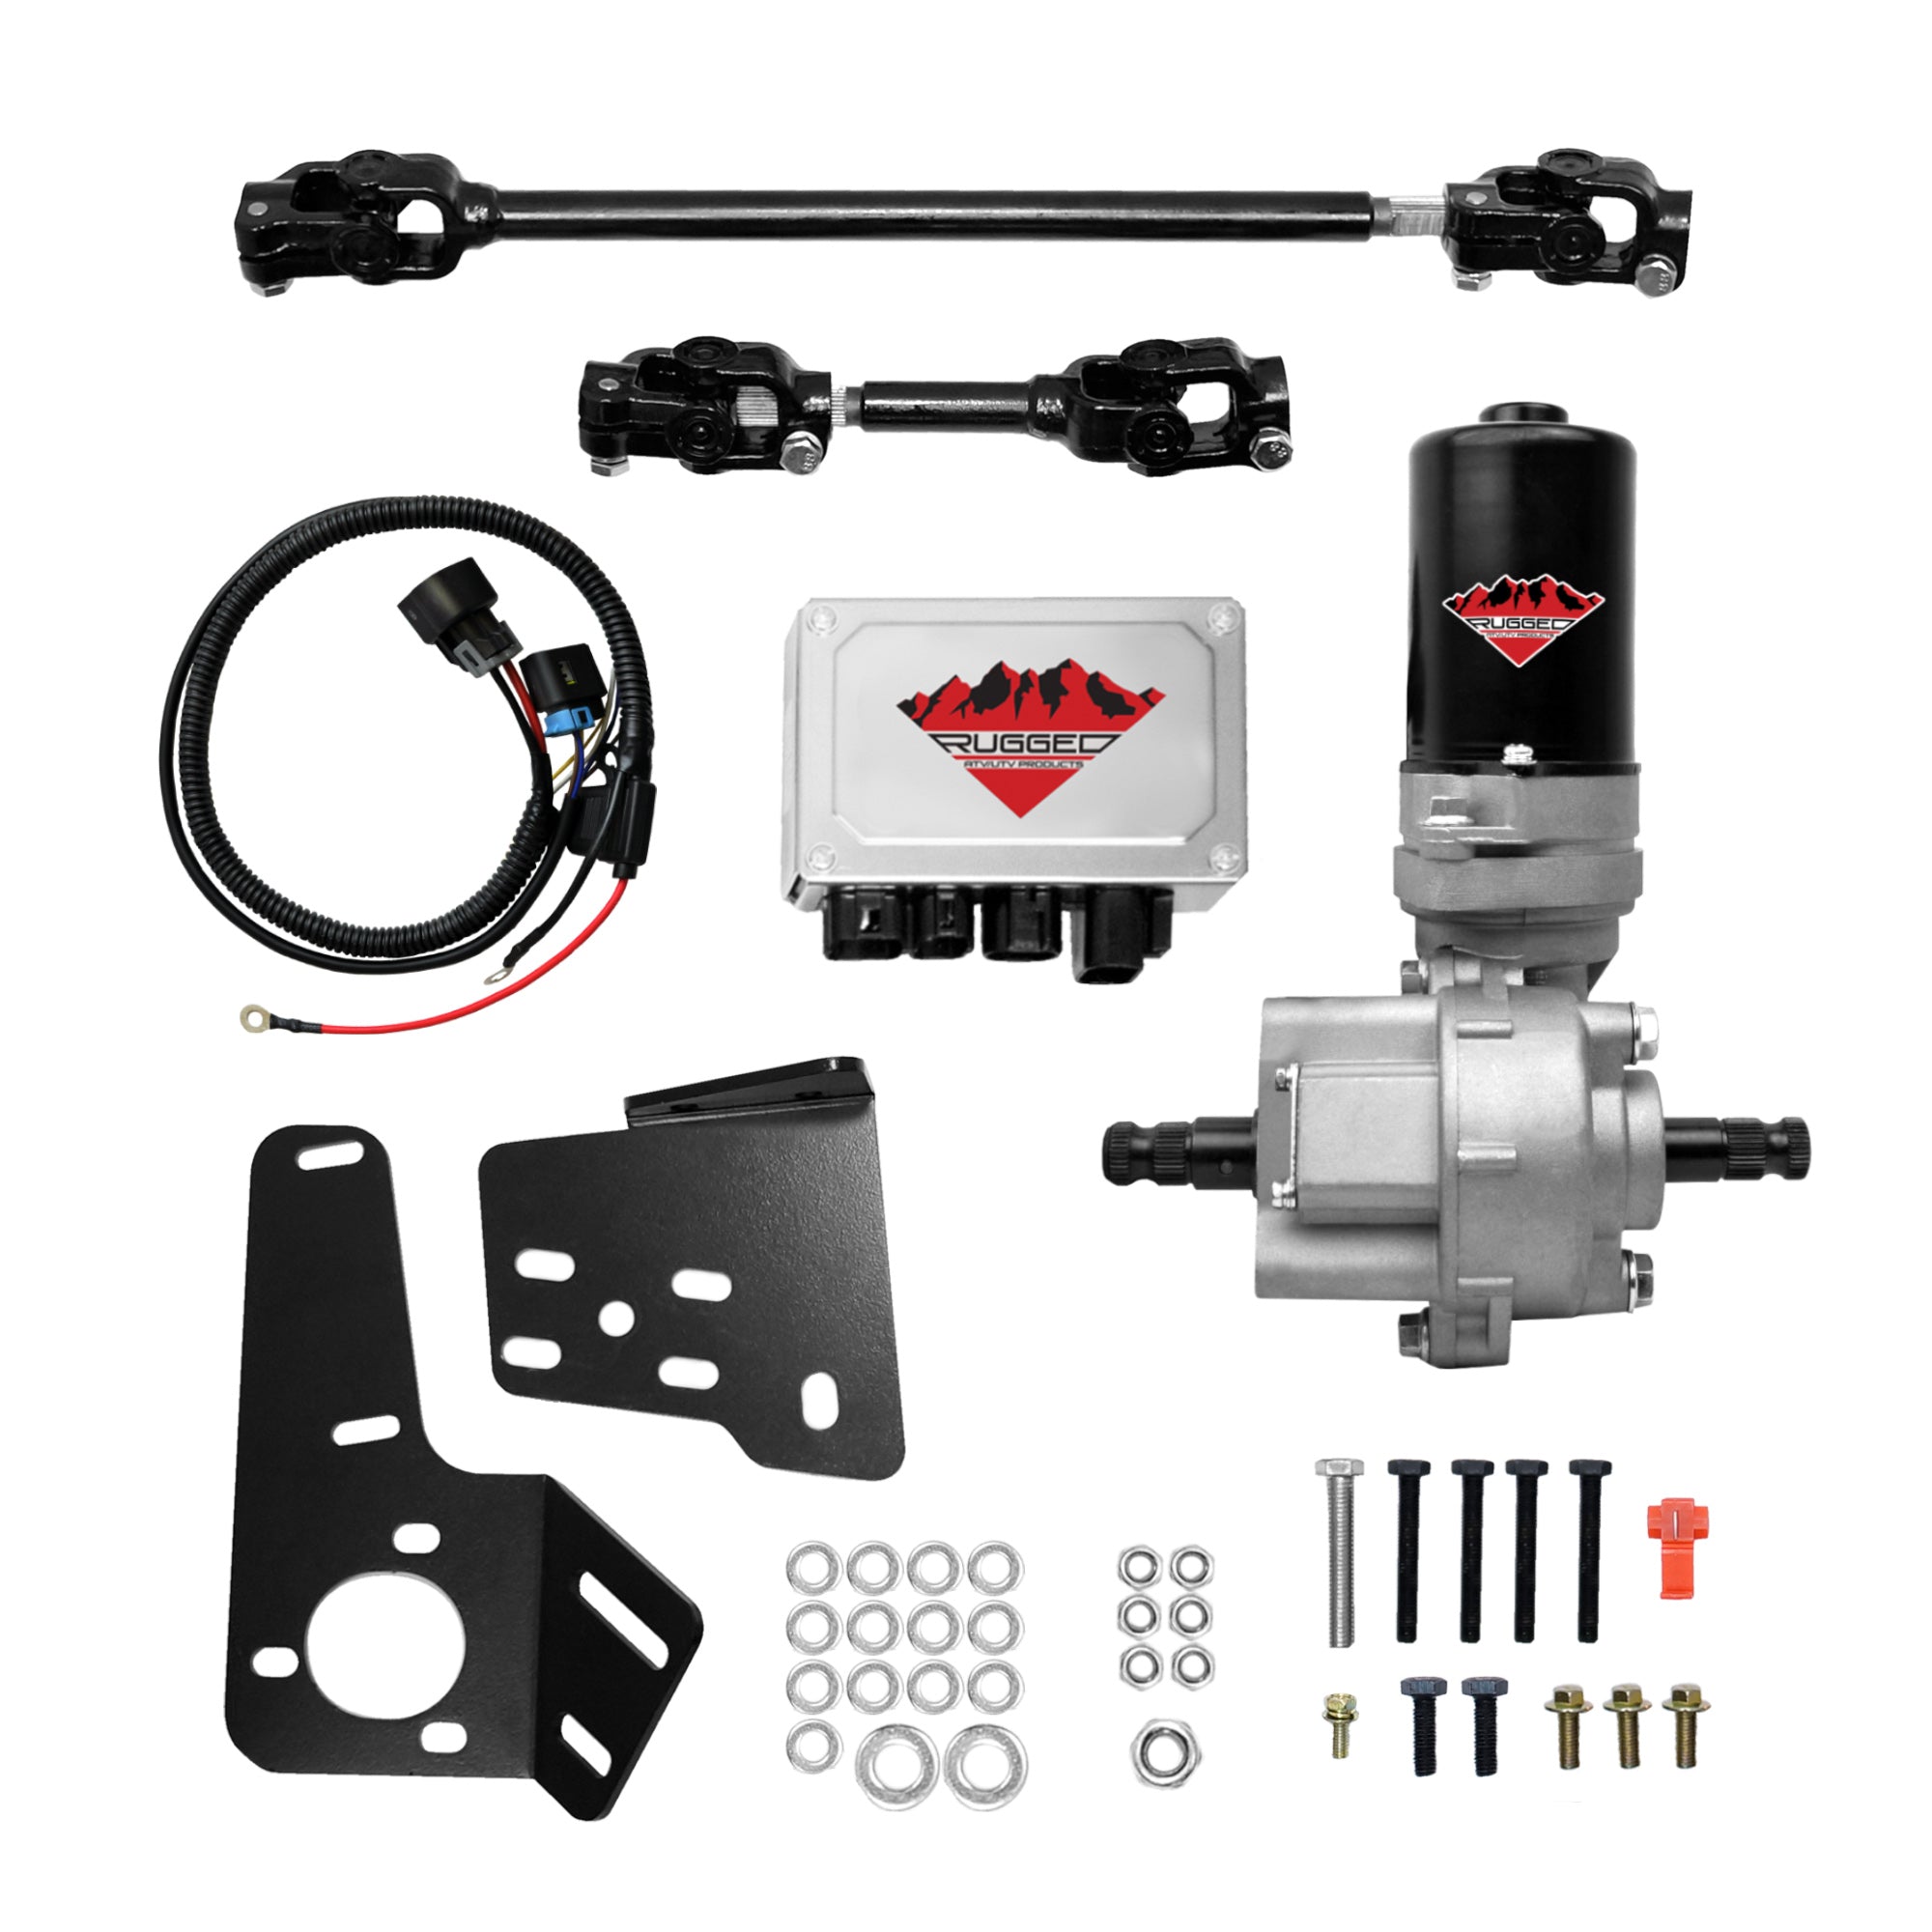 Electric Power Steering Kit for Can Am Maverick Trail 1000 